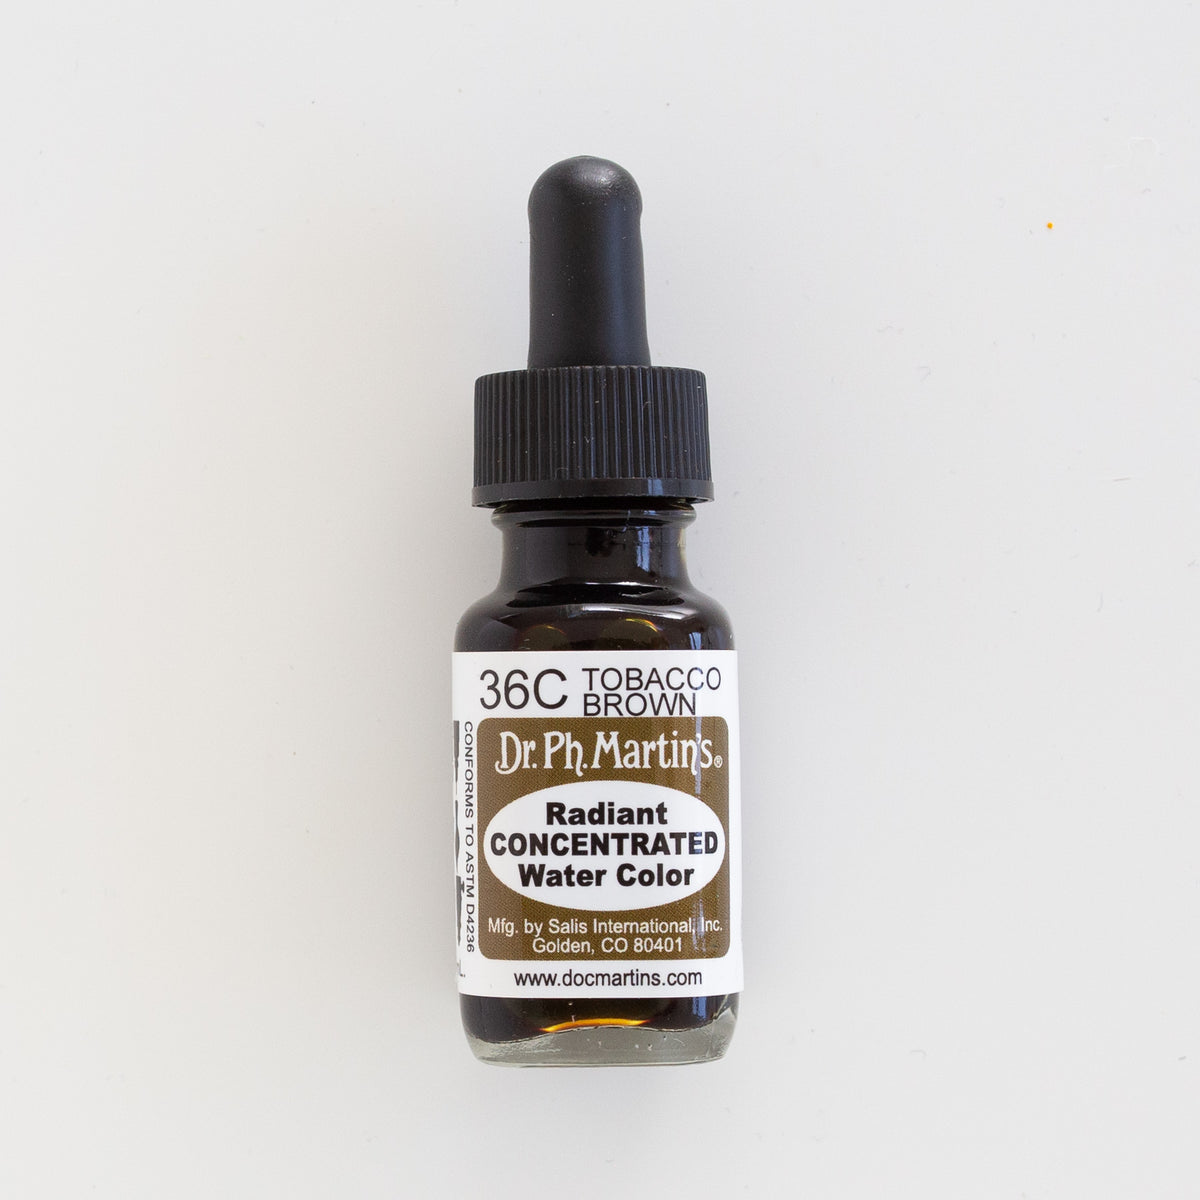 Dr. Ph. Martin’s Radiant Concentrated 36C Tobacco Brown